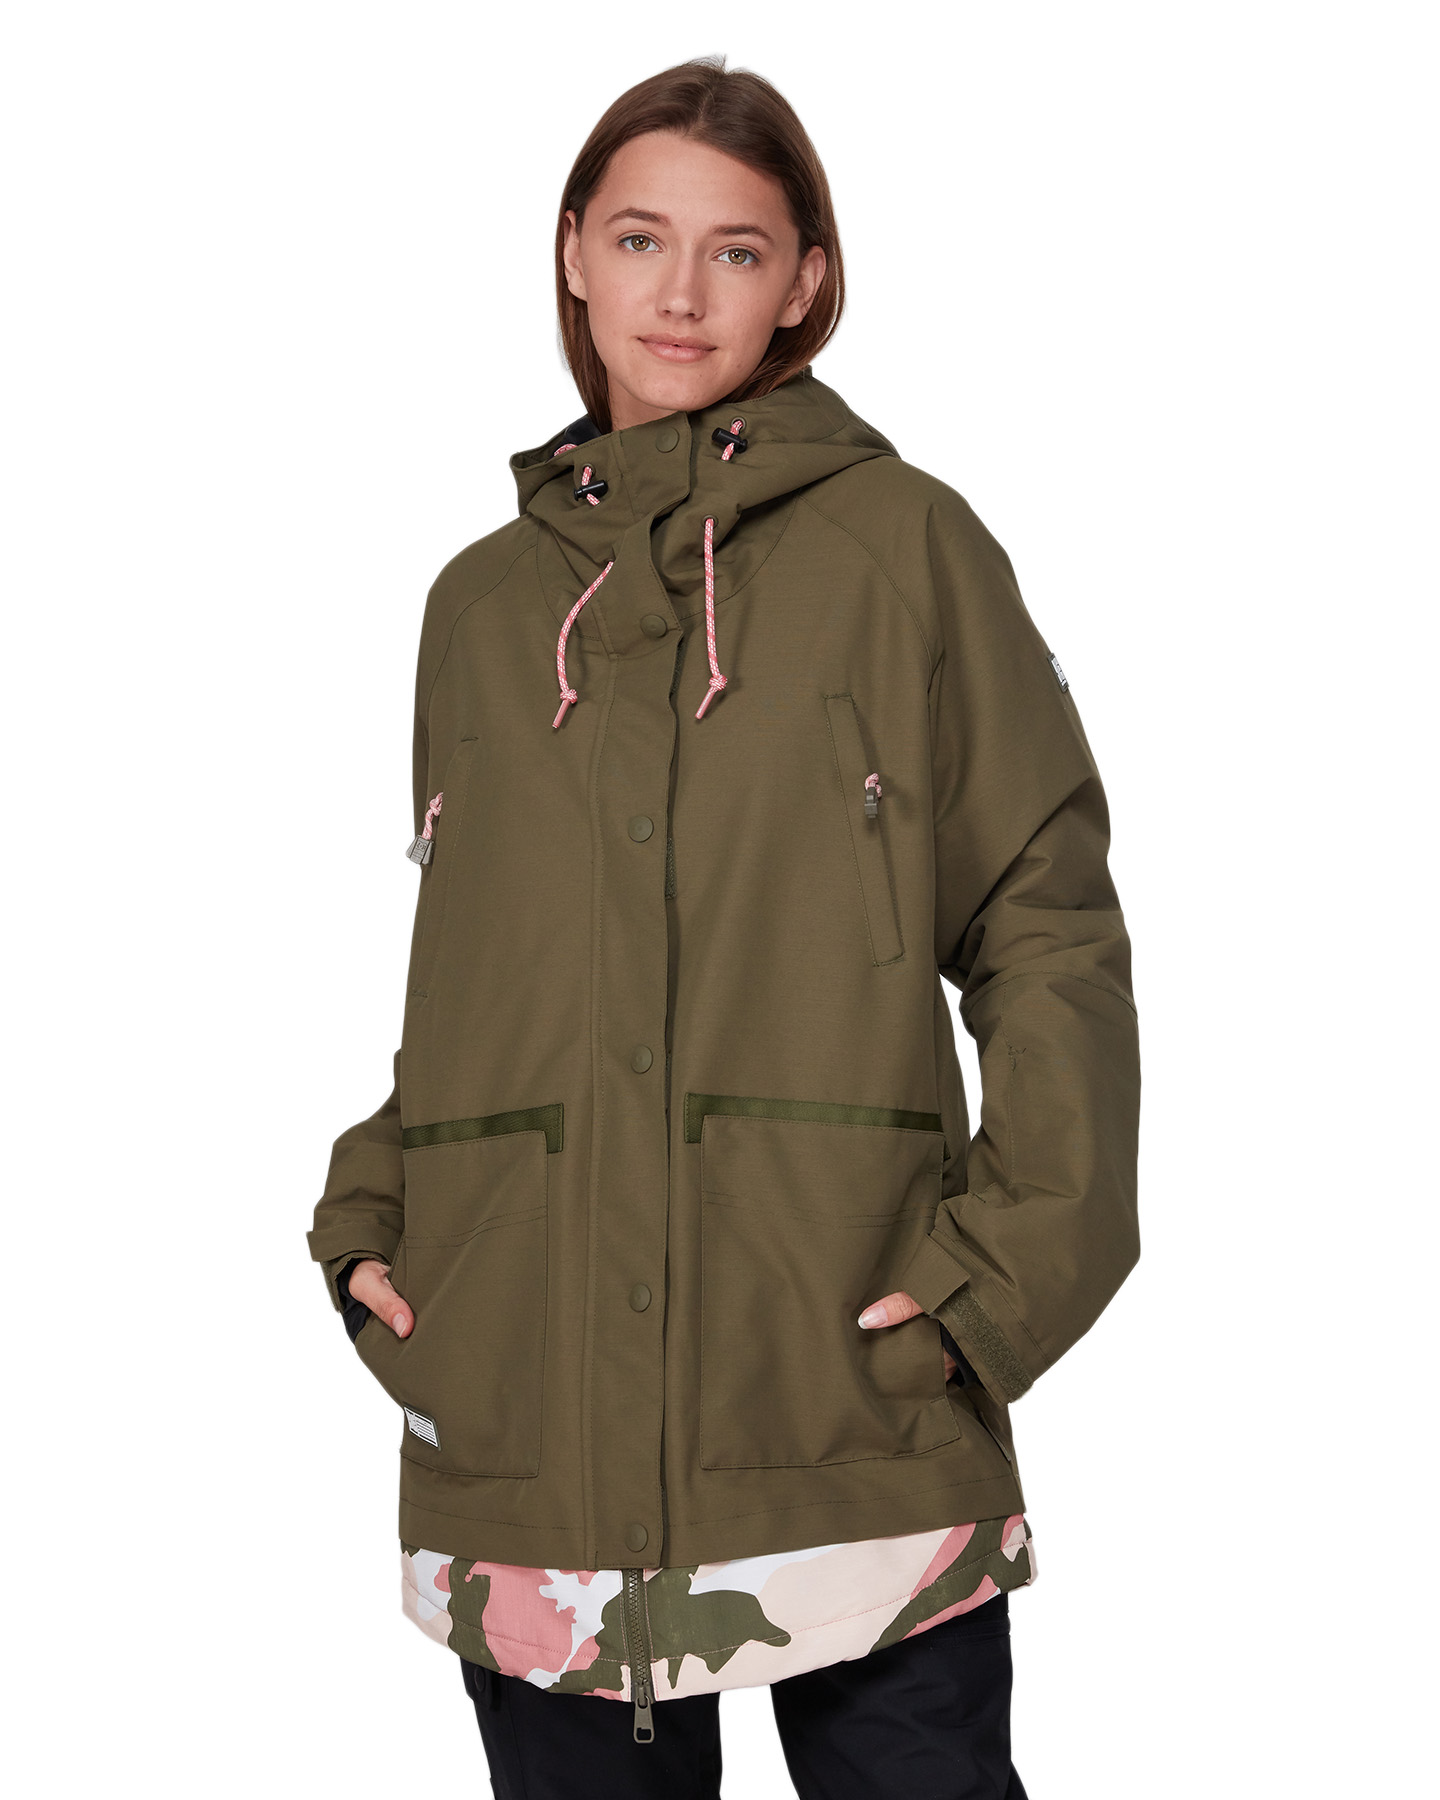 Dc Shoes Womens Riji Snow Jacket - Olive Night | SurfStitch